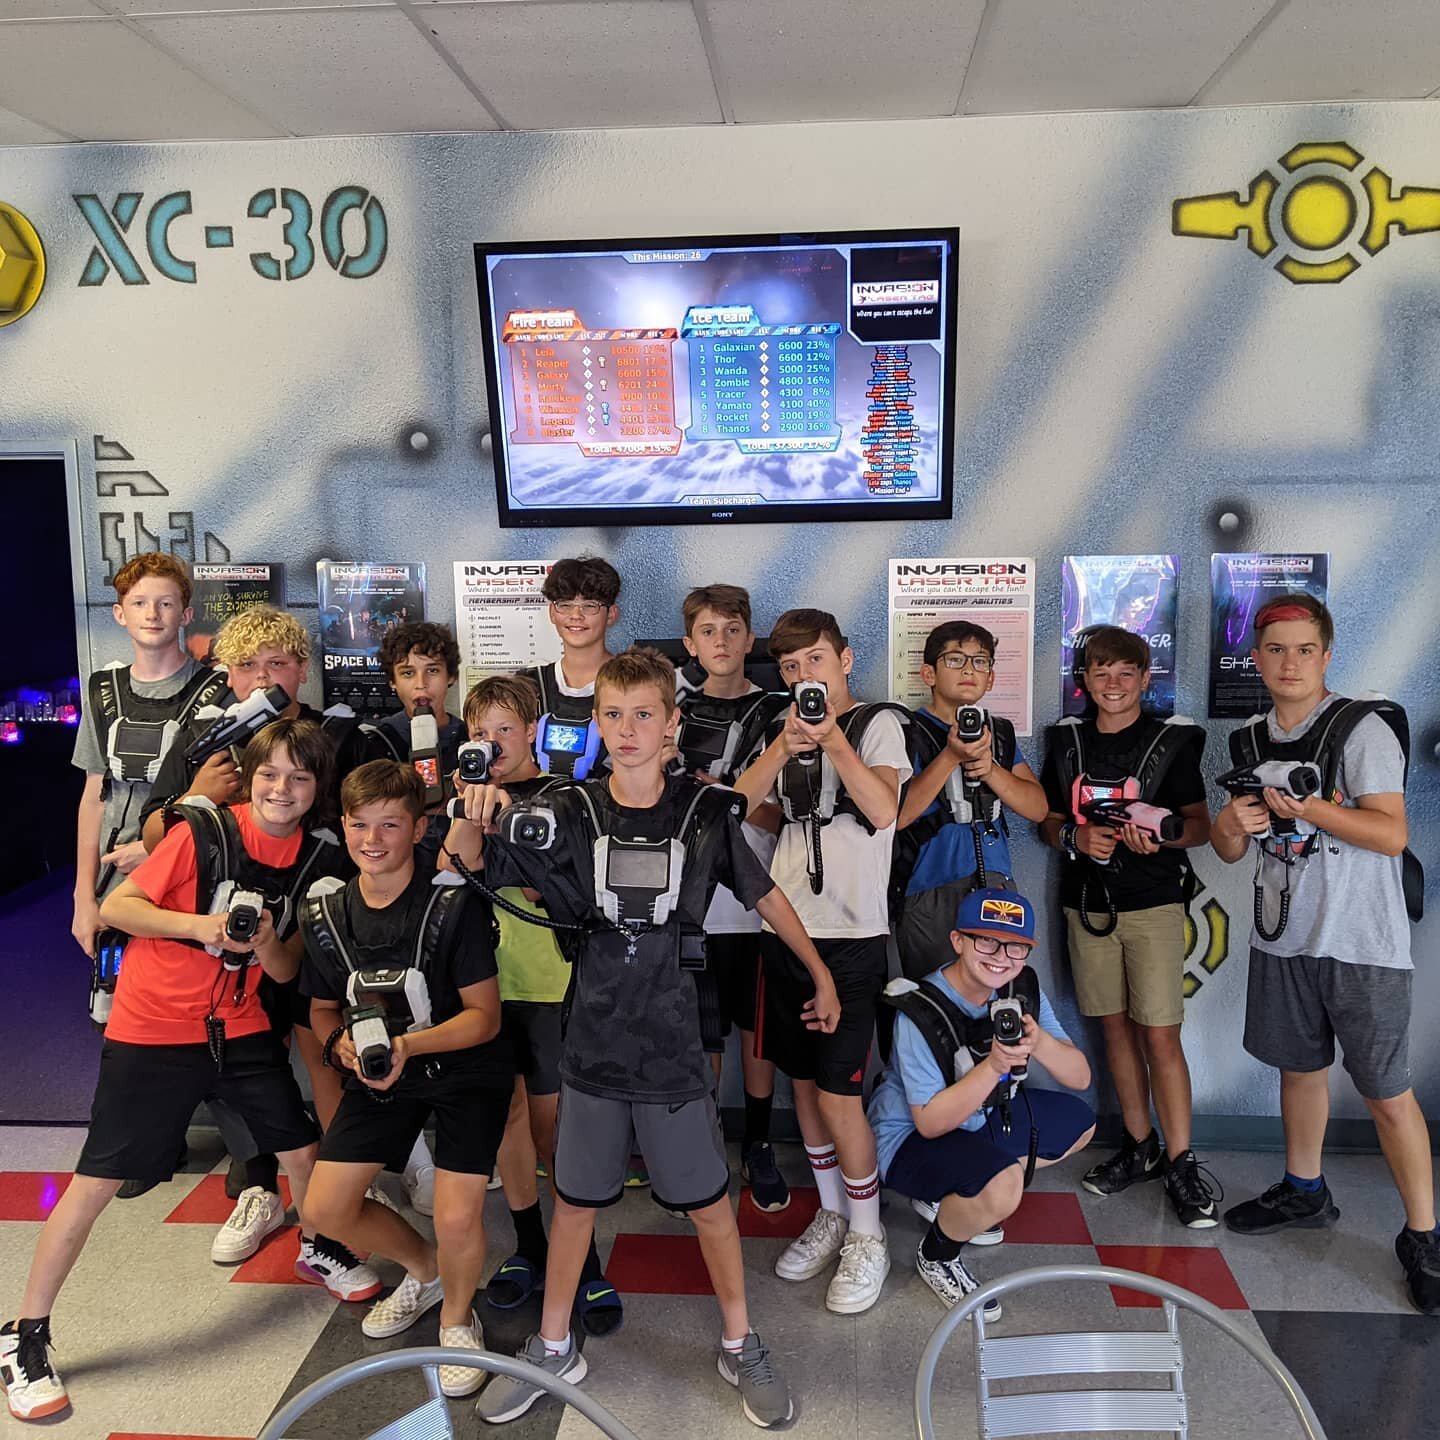 #48familyfridays #culture
When they're not collecting 🏆 the 2027 Black team winds down with some intense games of Lazer Tag! 
Off-field friendships lead to on-field success! 
We love lacrosse, but Team 48 also wants to play a part in building positi